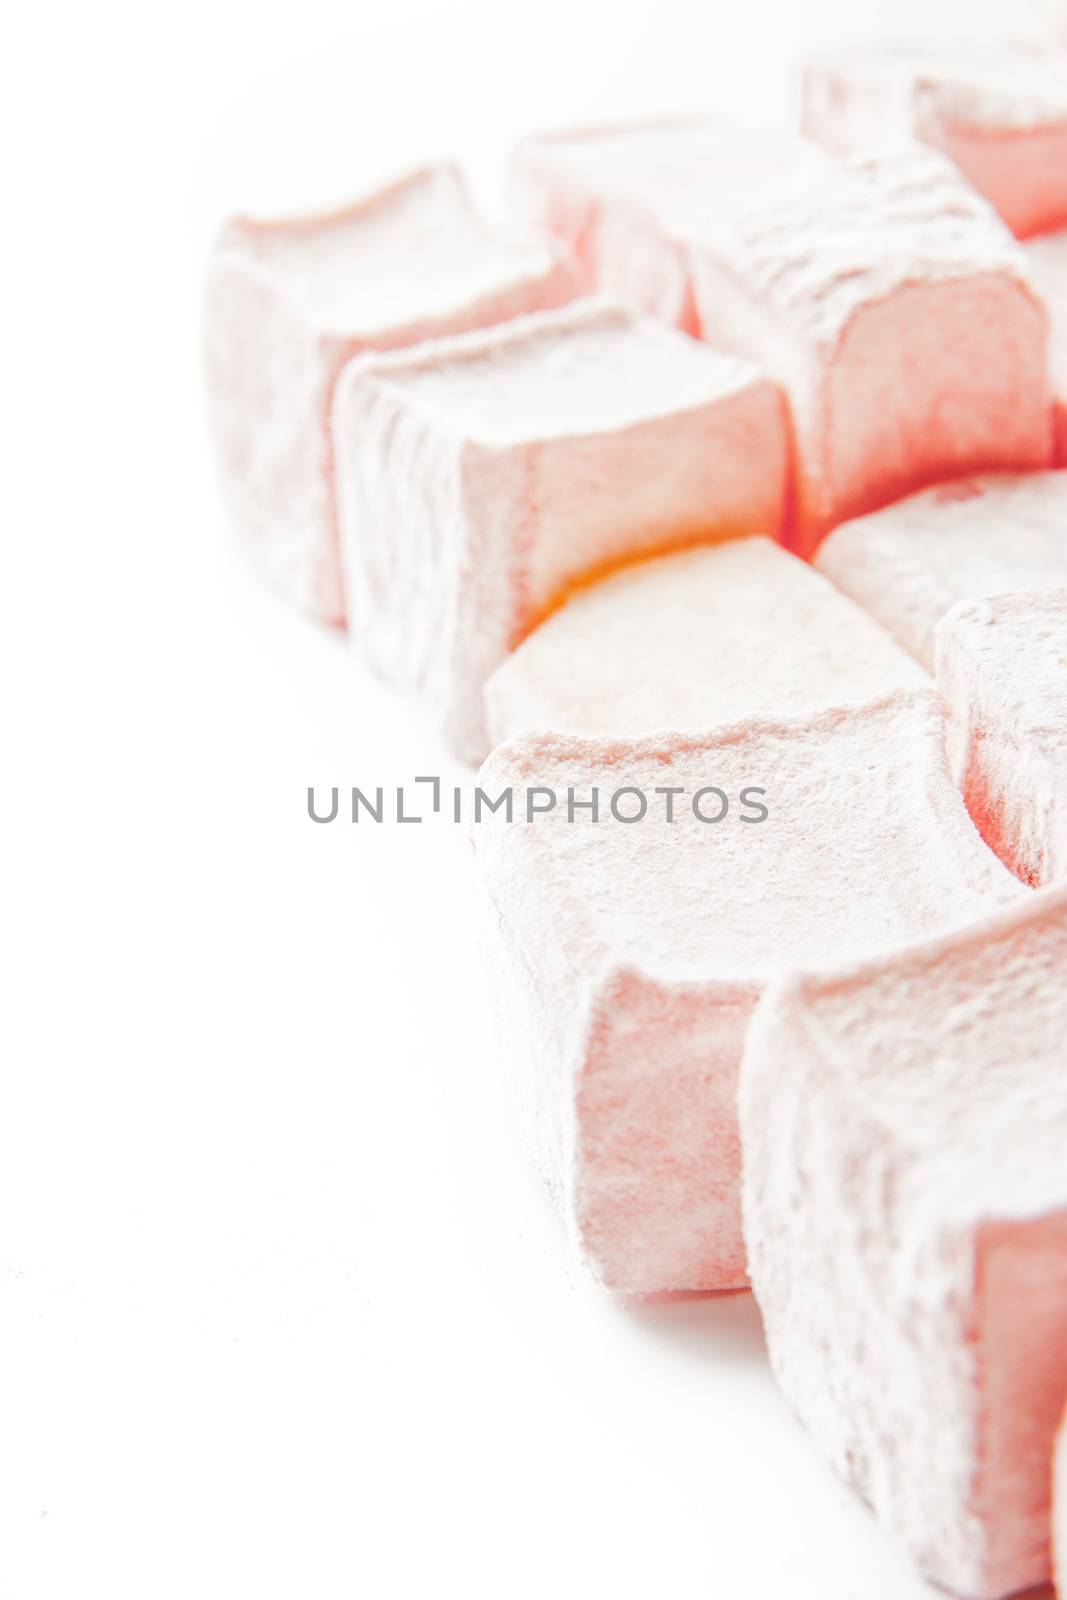 Turkish delight on the white background vertical